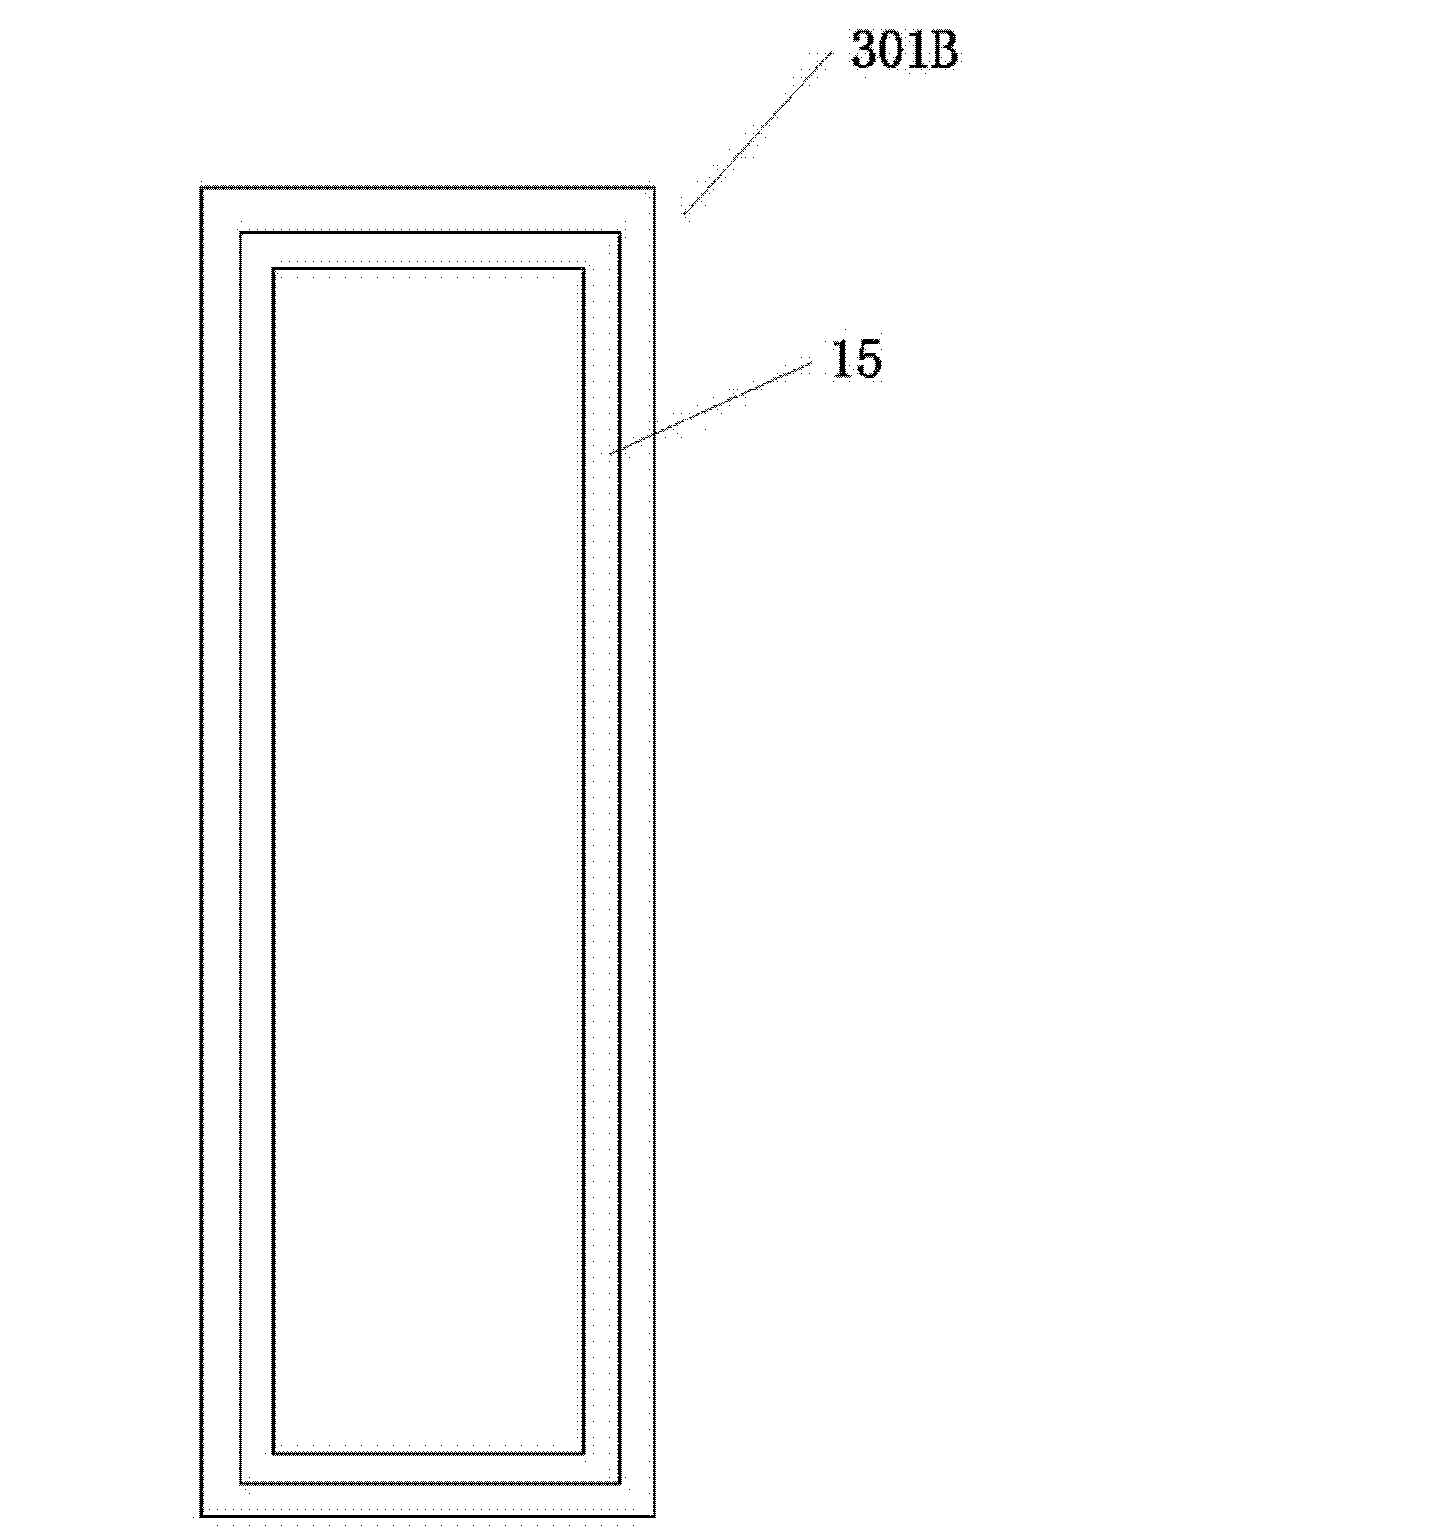 System and method utilizing flue duct waste gas of hot air furnace to bake and preheat charging of blast furnace